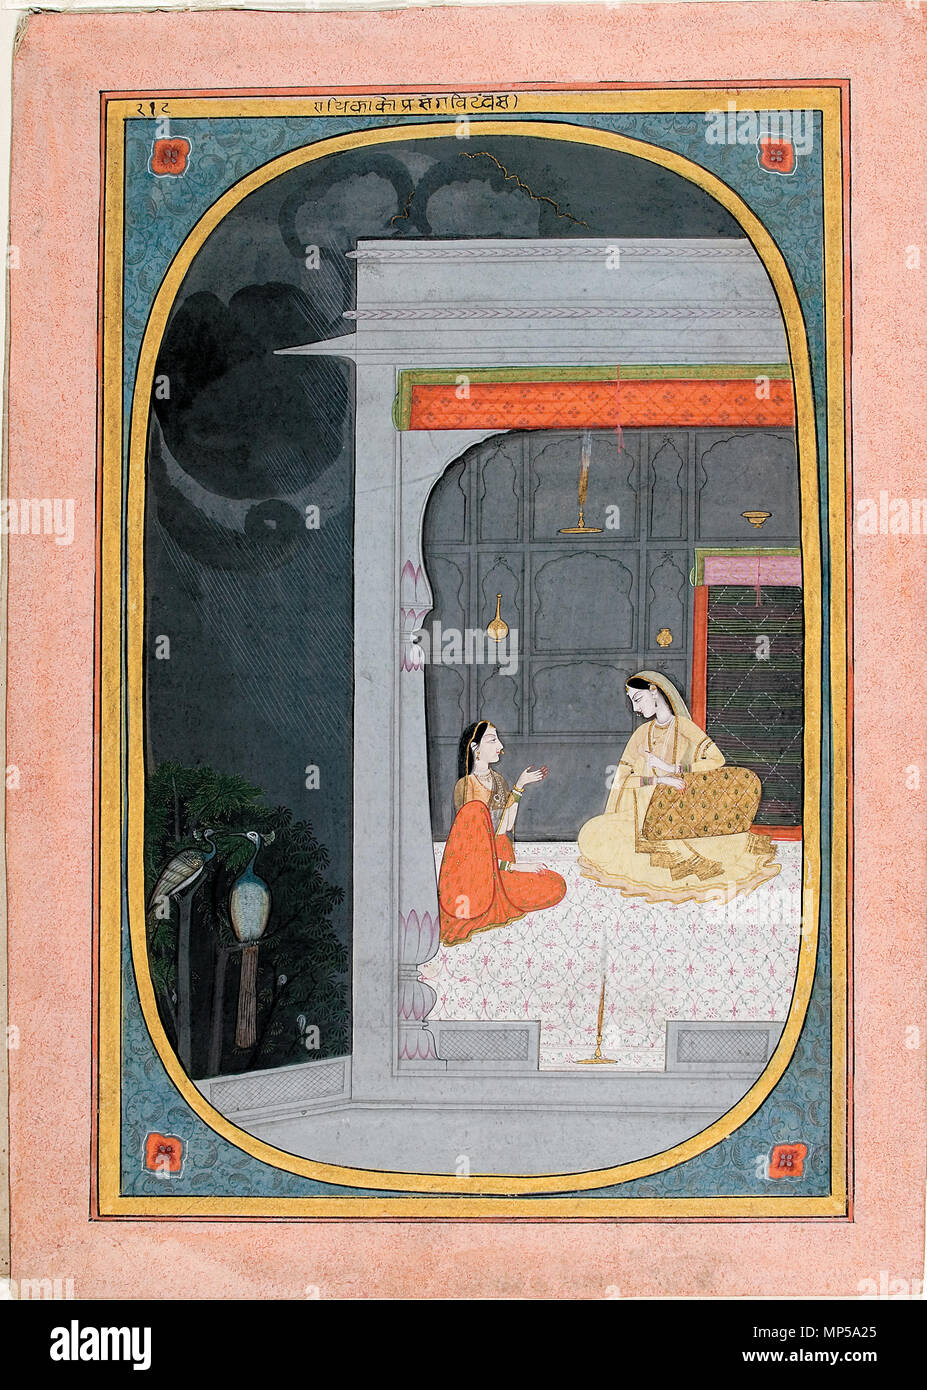 . English: Series Title: Connoisseur's Delight Suite Name: Raiskapriya Creation Date: ca. 1820 Display Dimensions: 12 3/8 in. x 8 25/32 in. (31.4 cm x 22.3 cm) Credit Line: Edwin Binney 3rd Collection Accession Number: 1990.1299 Collection: <a href='http://www.sdmart.org/art/our-collection/asian-art' rel='nofollow'>The San Diego Museum of Art</a> . 14 November 2005, 13:24:17. English: thesandiegomuseumofartcollection 1037 Radha in a pavilion gazes at her sakhi (6125135772) Stock Photo